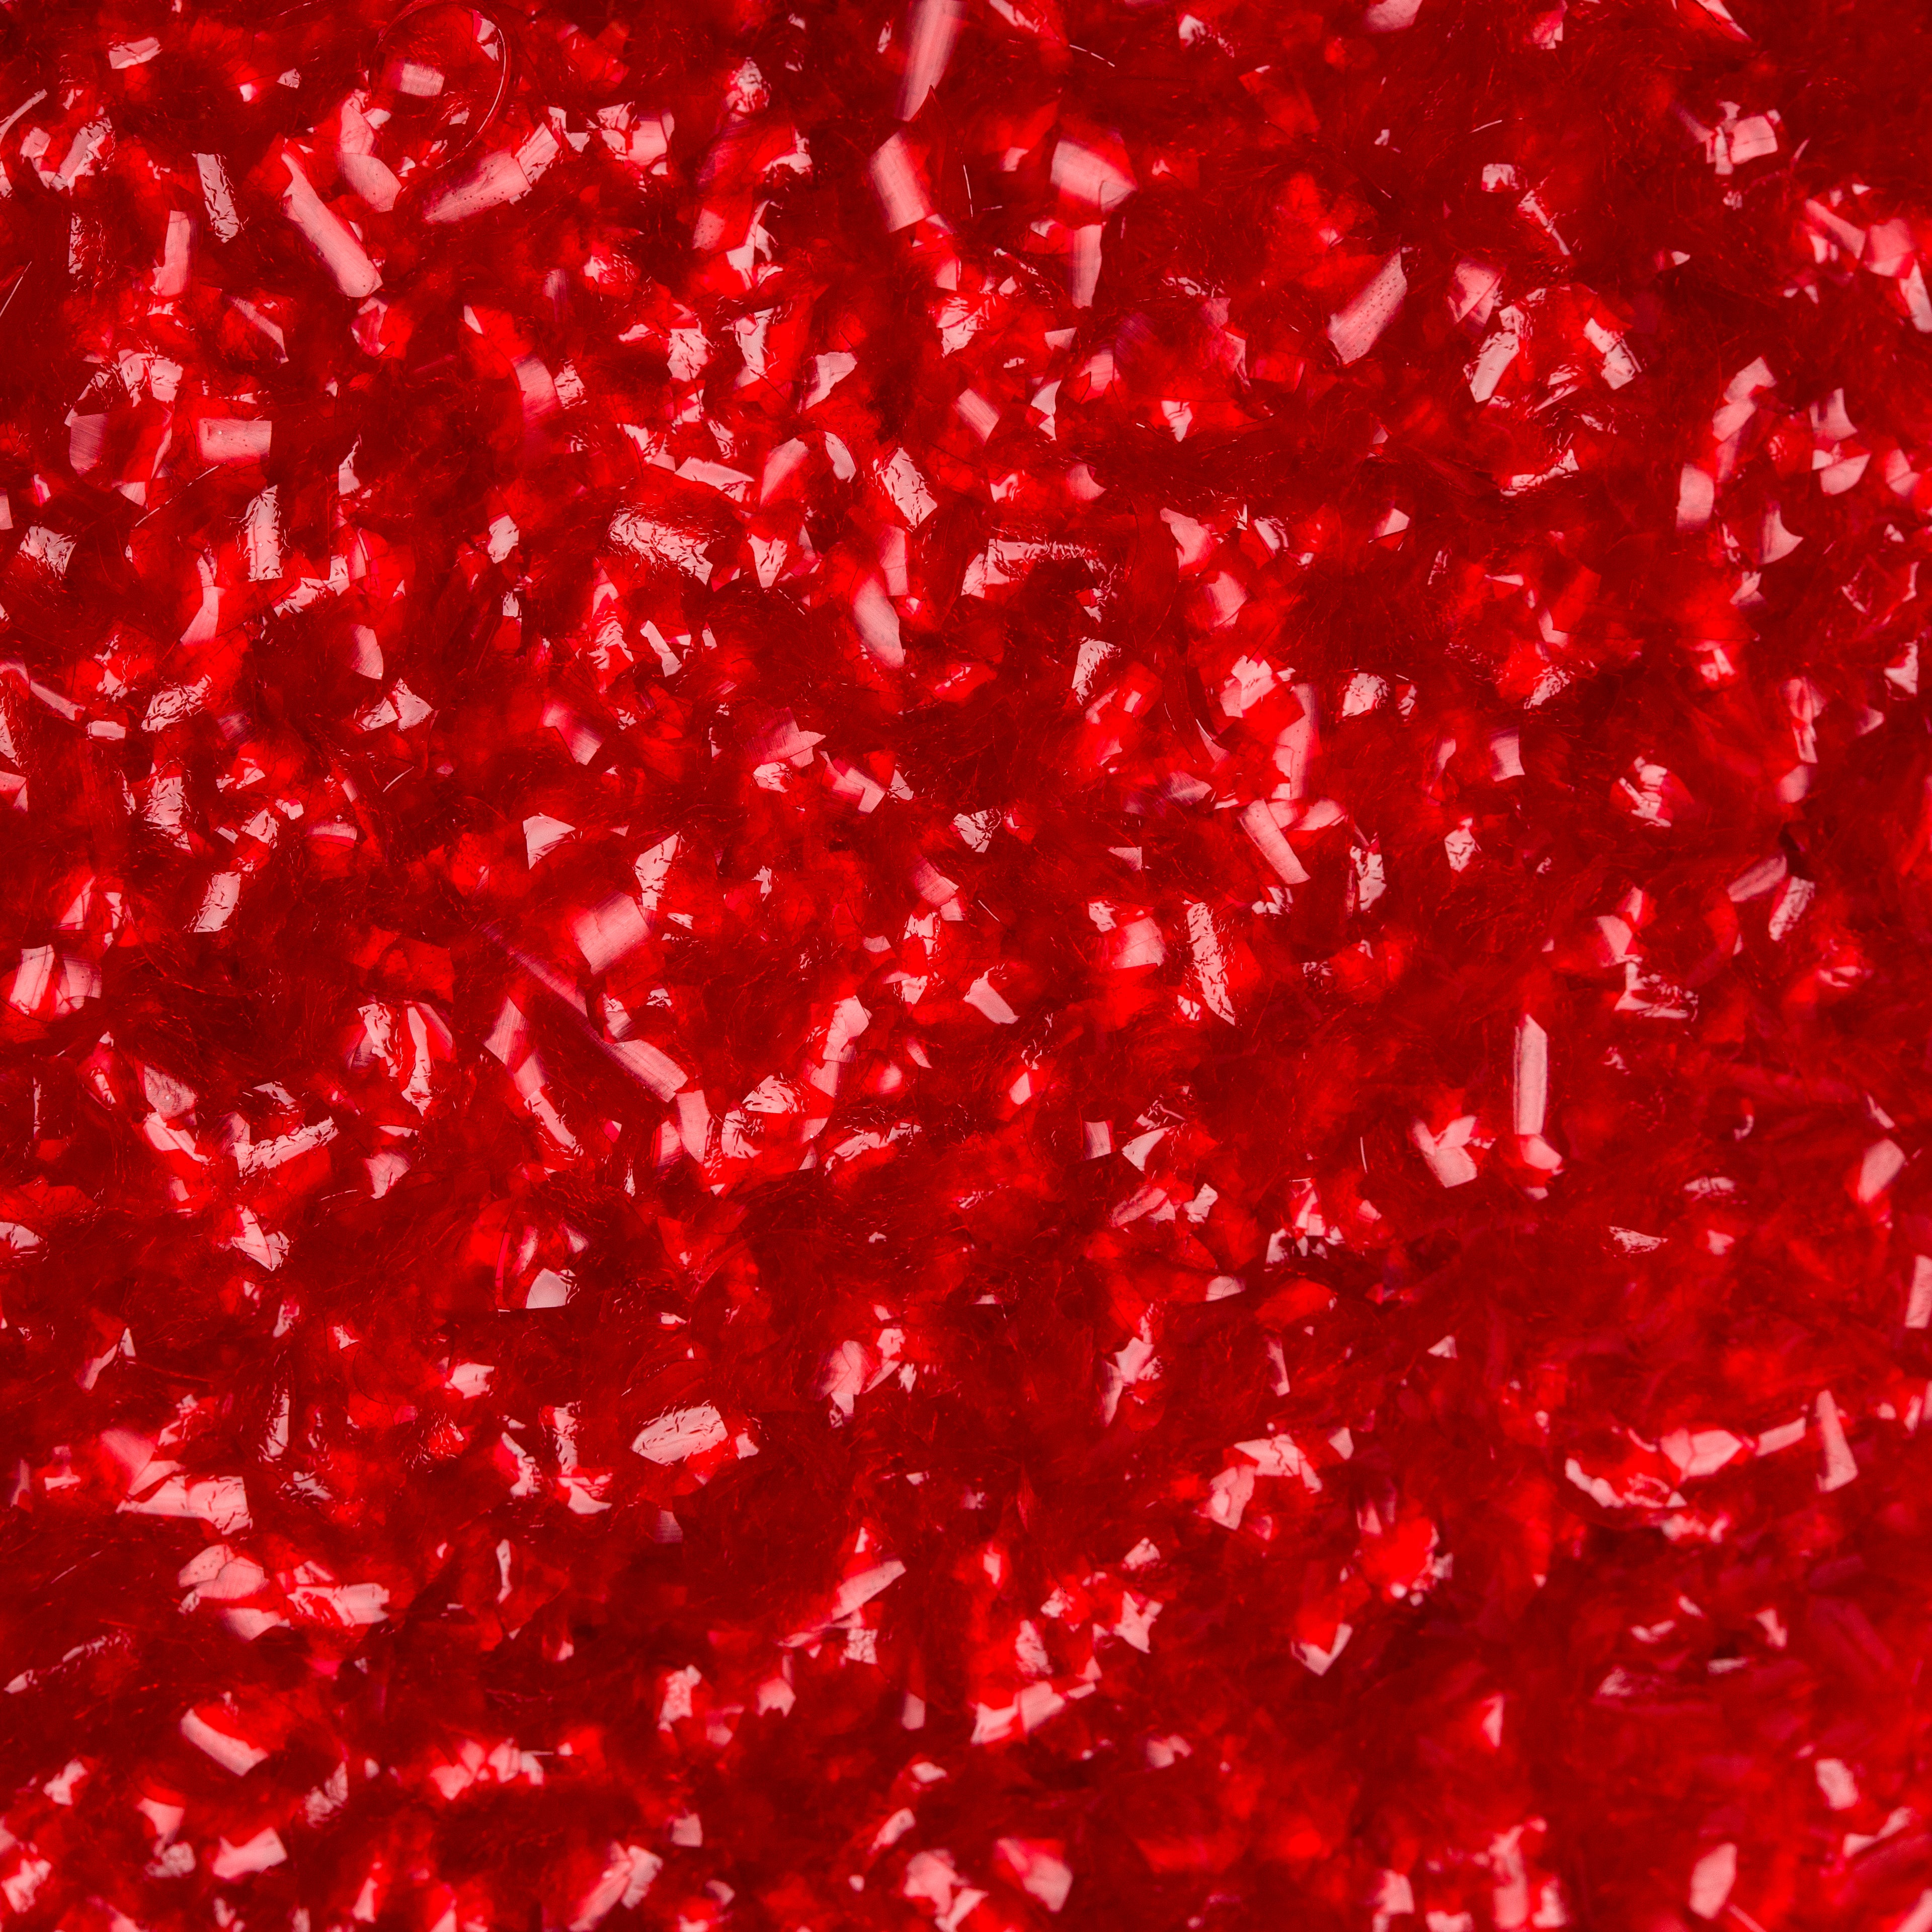 Red Edible Glitter Flakes